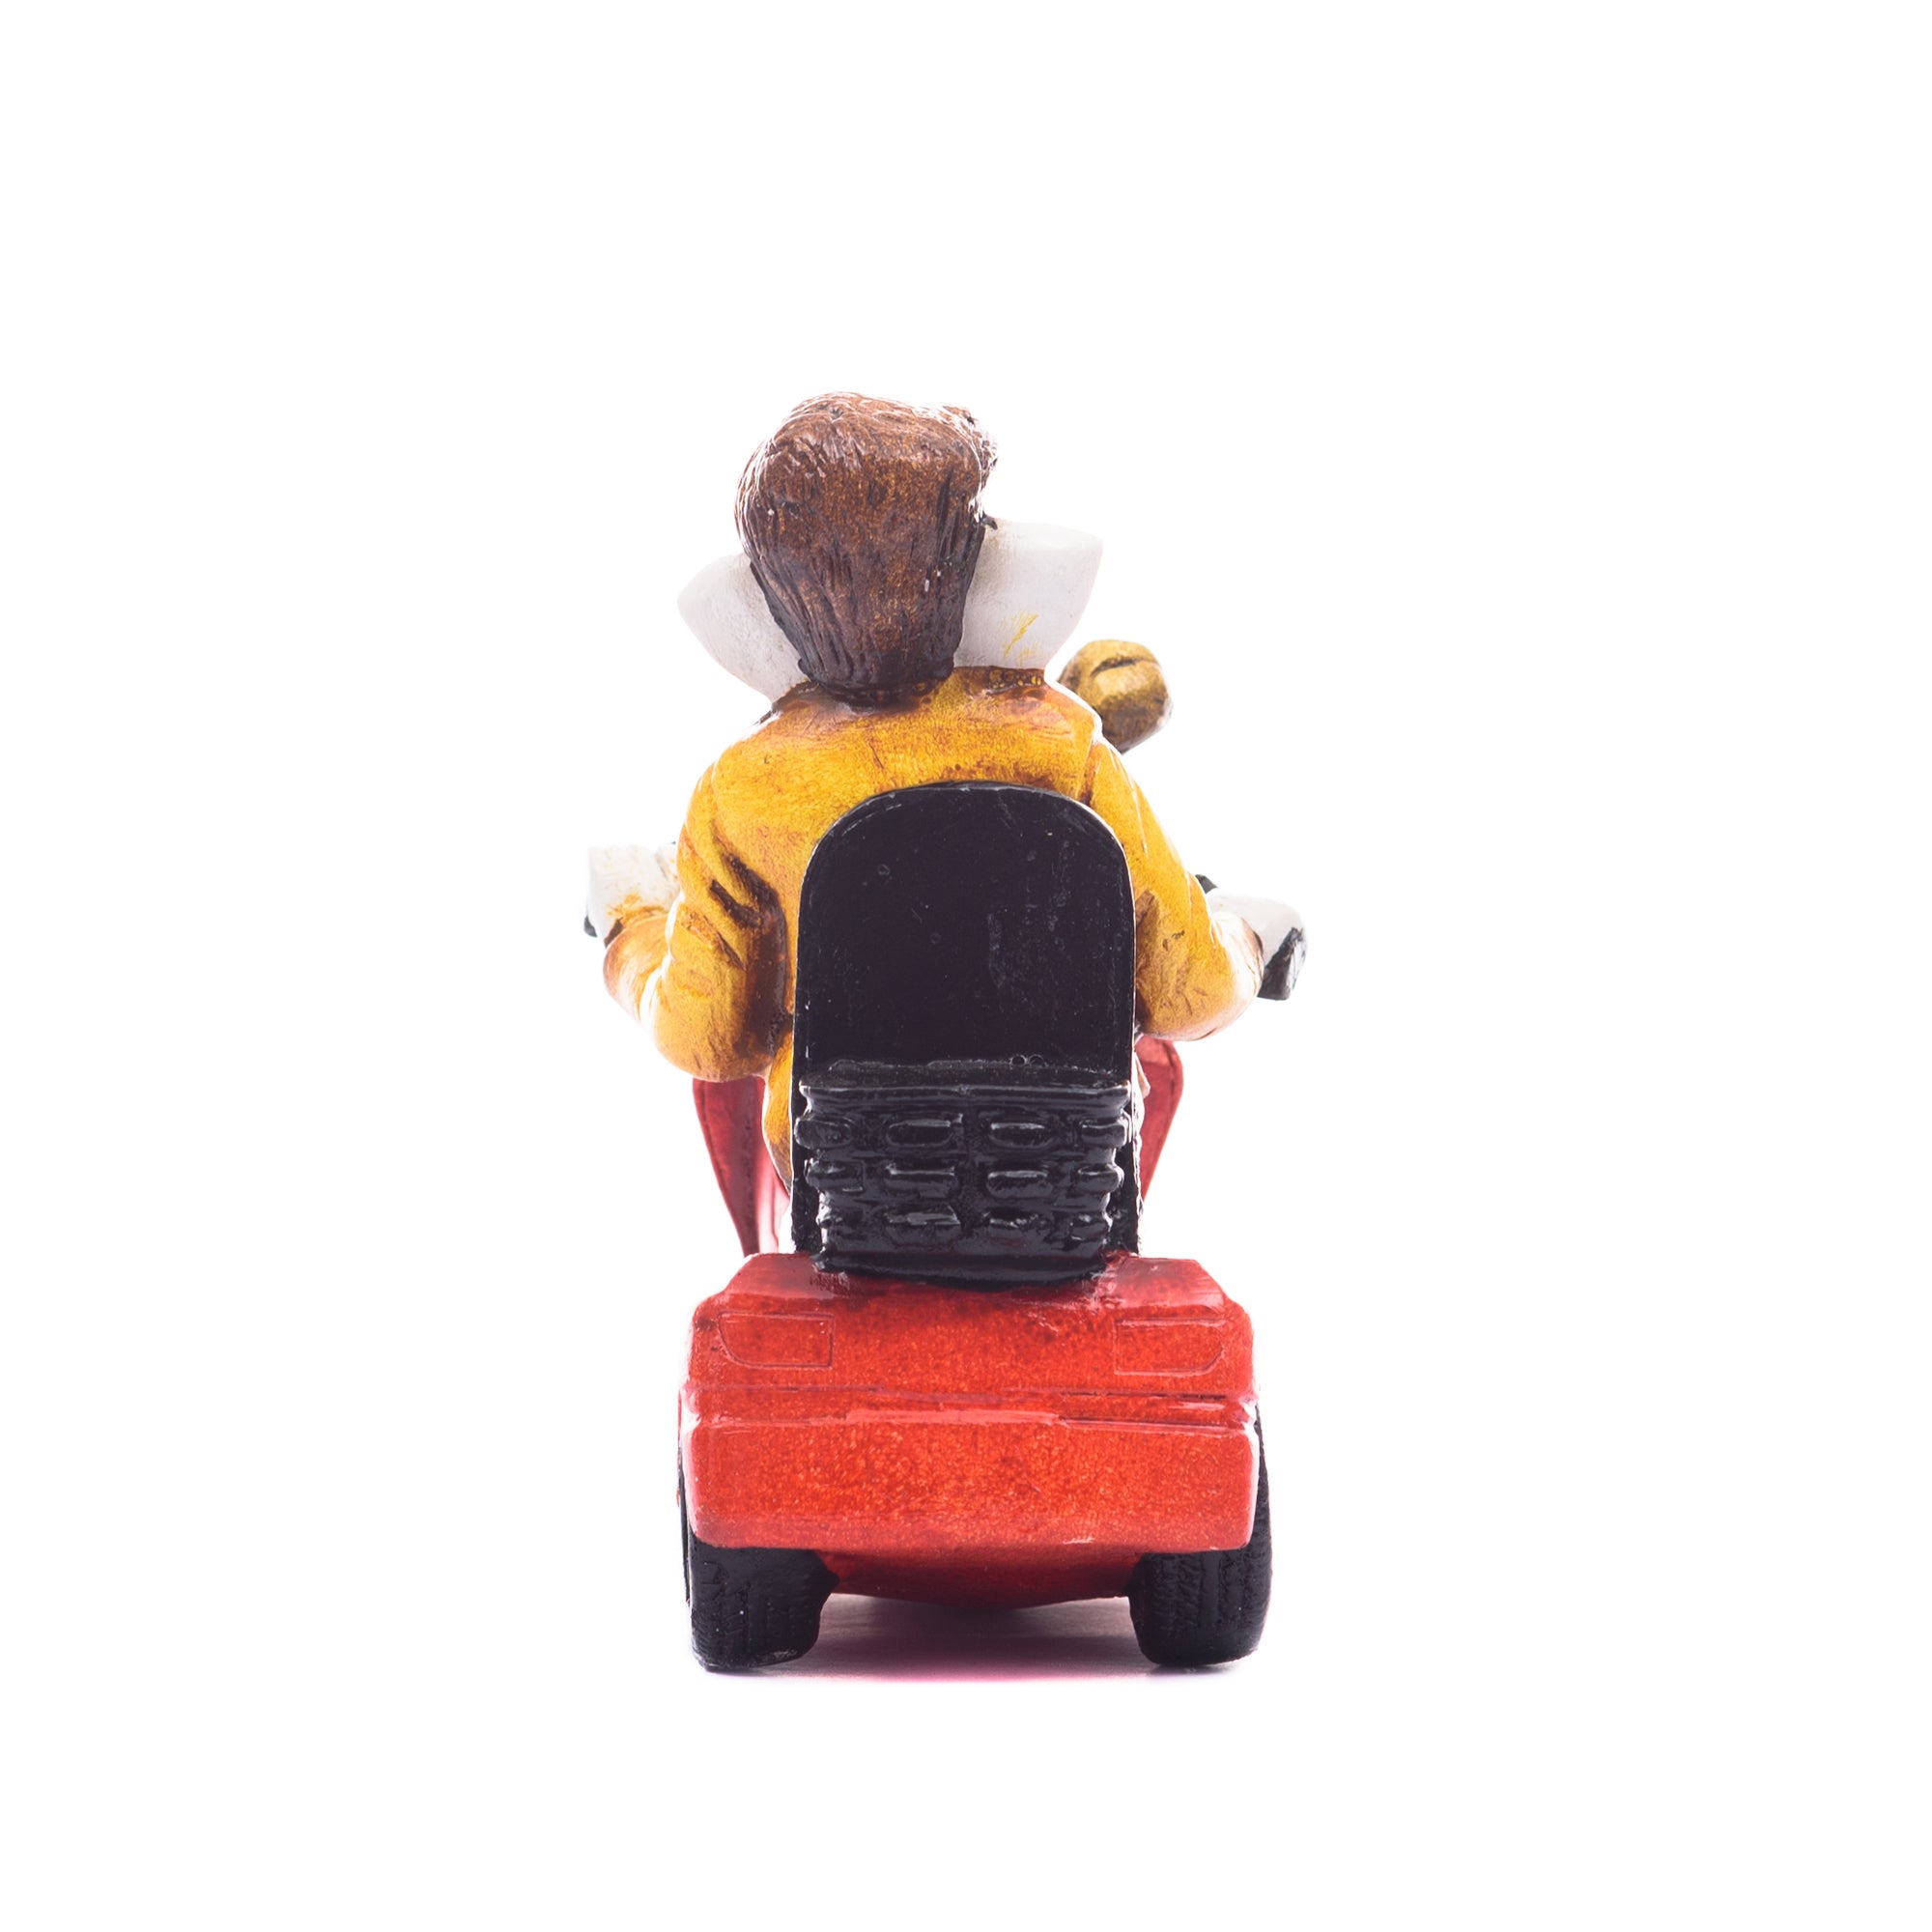 Polyresin Lord Ganesha Idol riding Scooter (Red and Yellow) 4